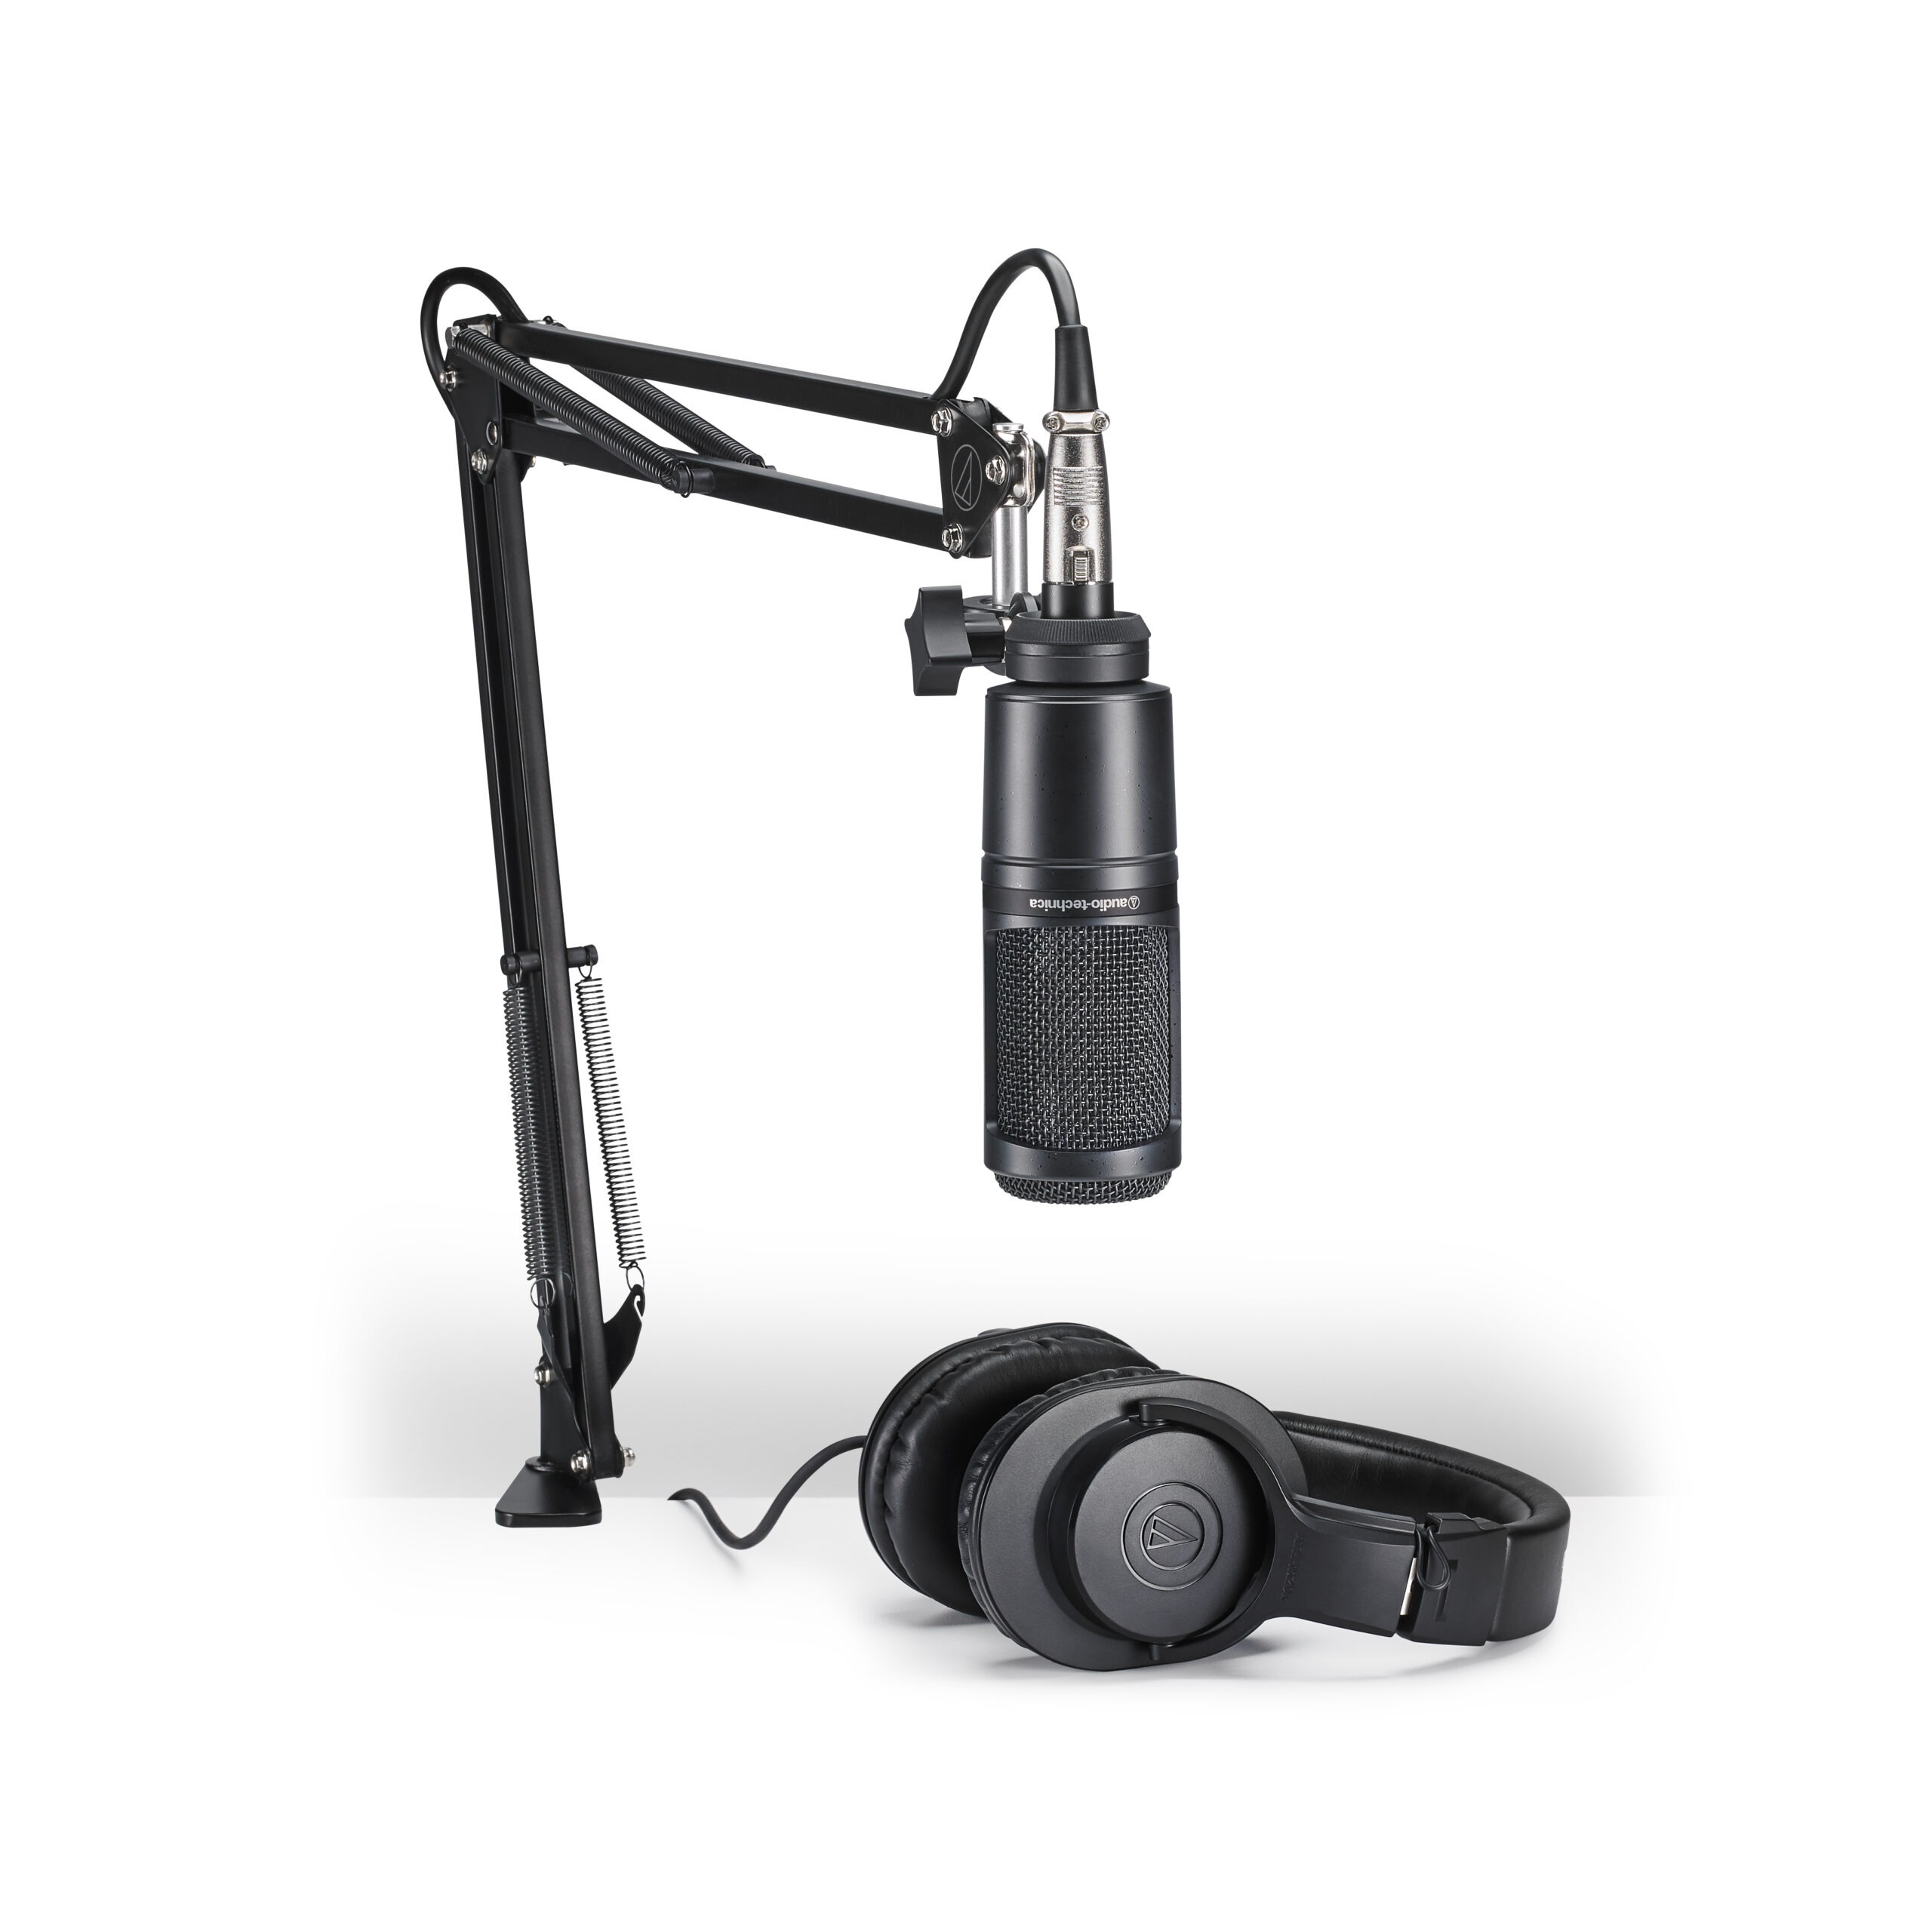 Audio-Technica AT2020 Studio Microphone Pack with ATH-M20x, Boom & XLR Cable 1188665-scaled Black Friday Digital DJ Gear